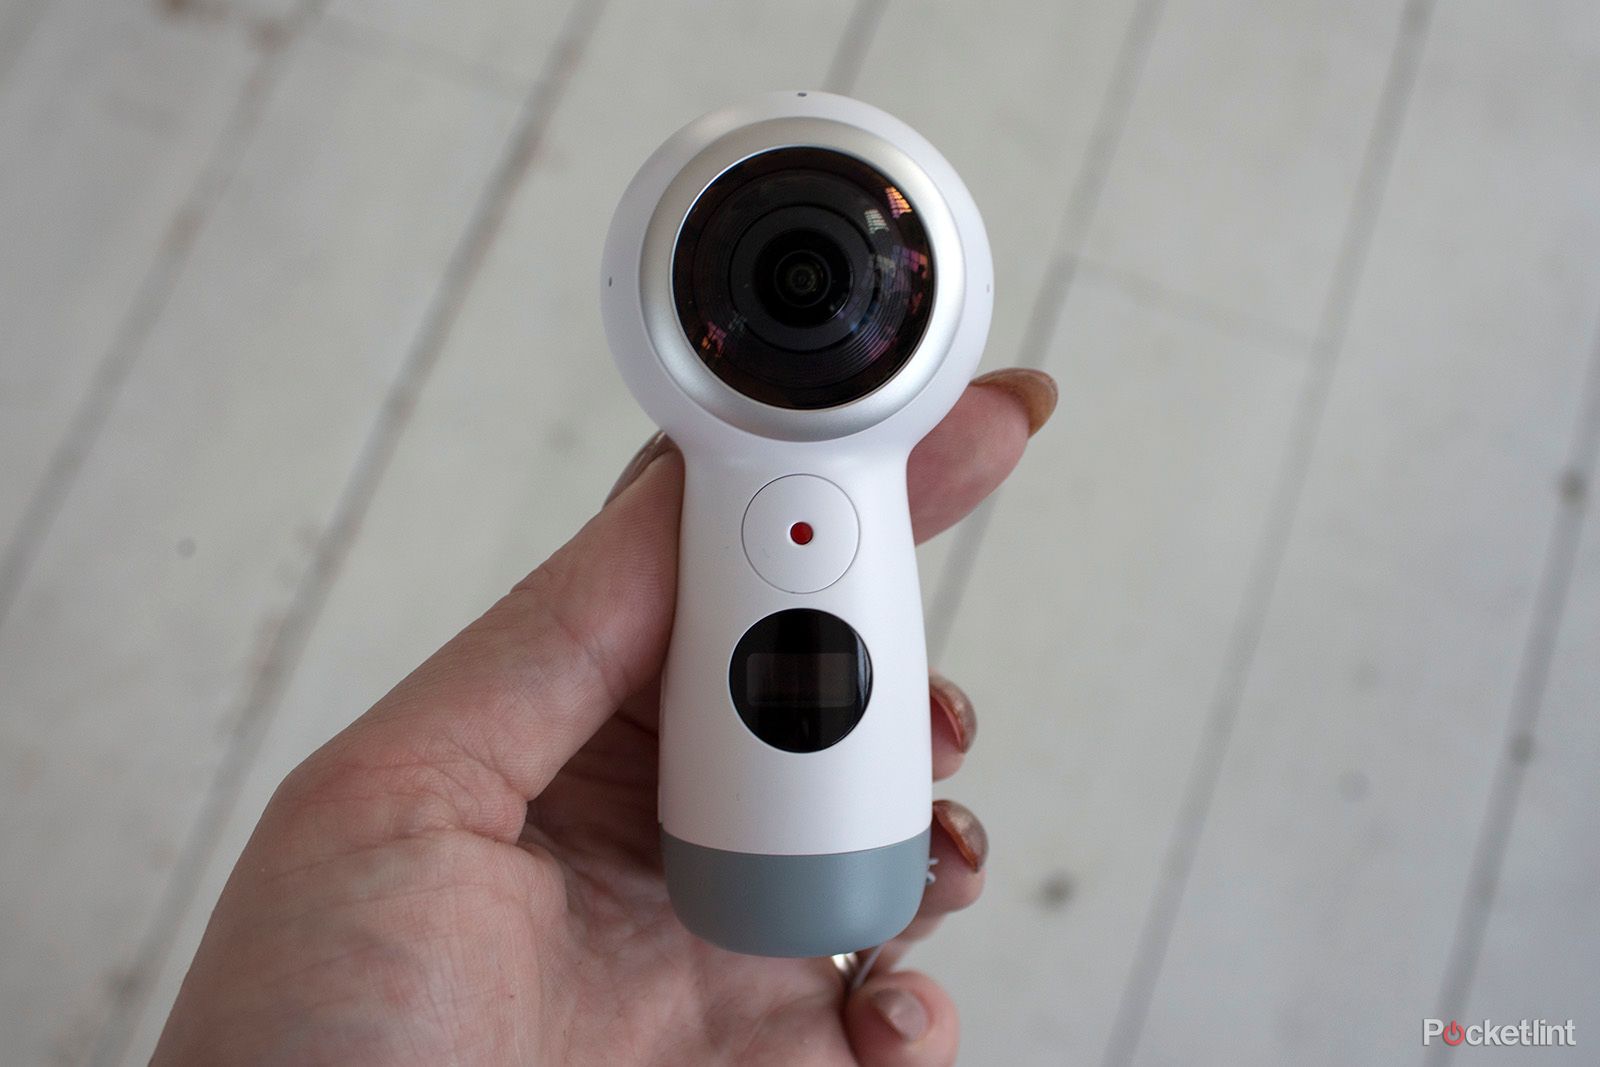 Samsungs latest trademark suggests a new 360-degree camera is coming image 1